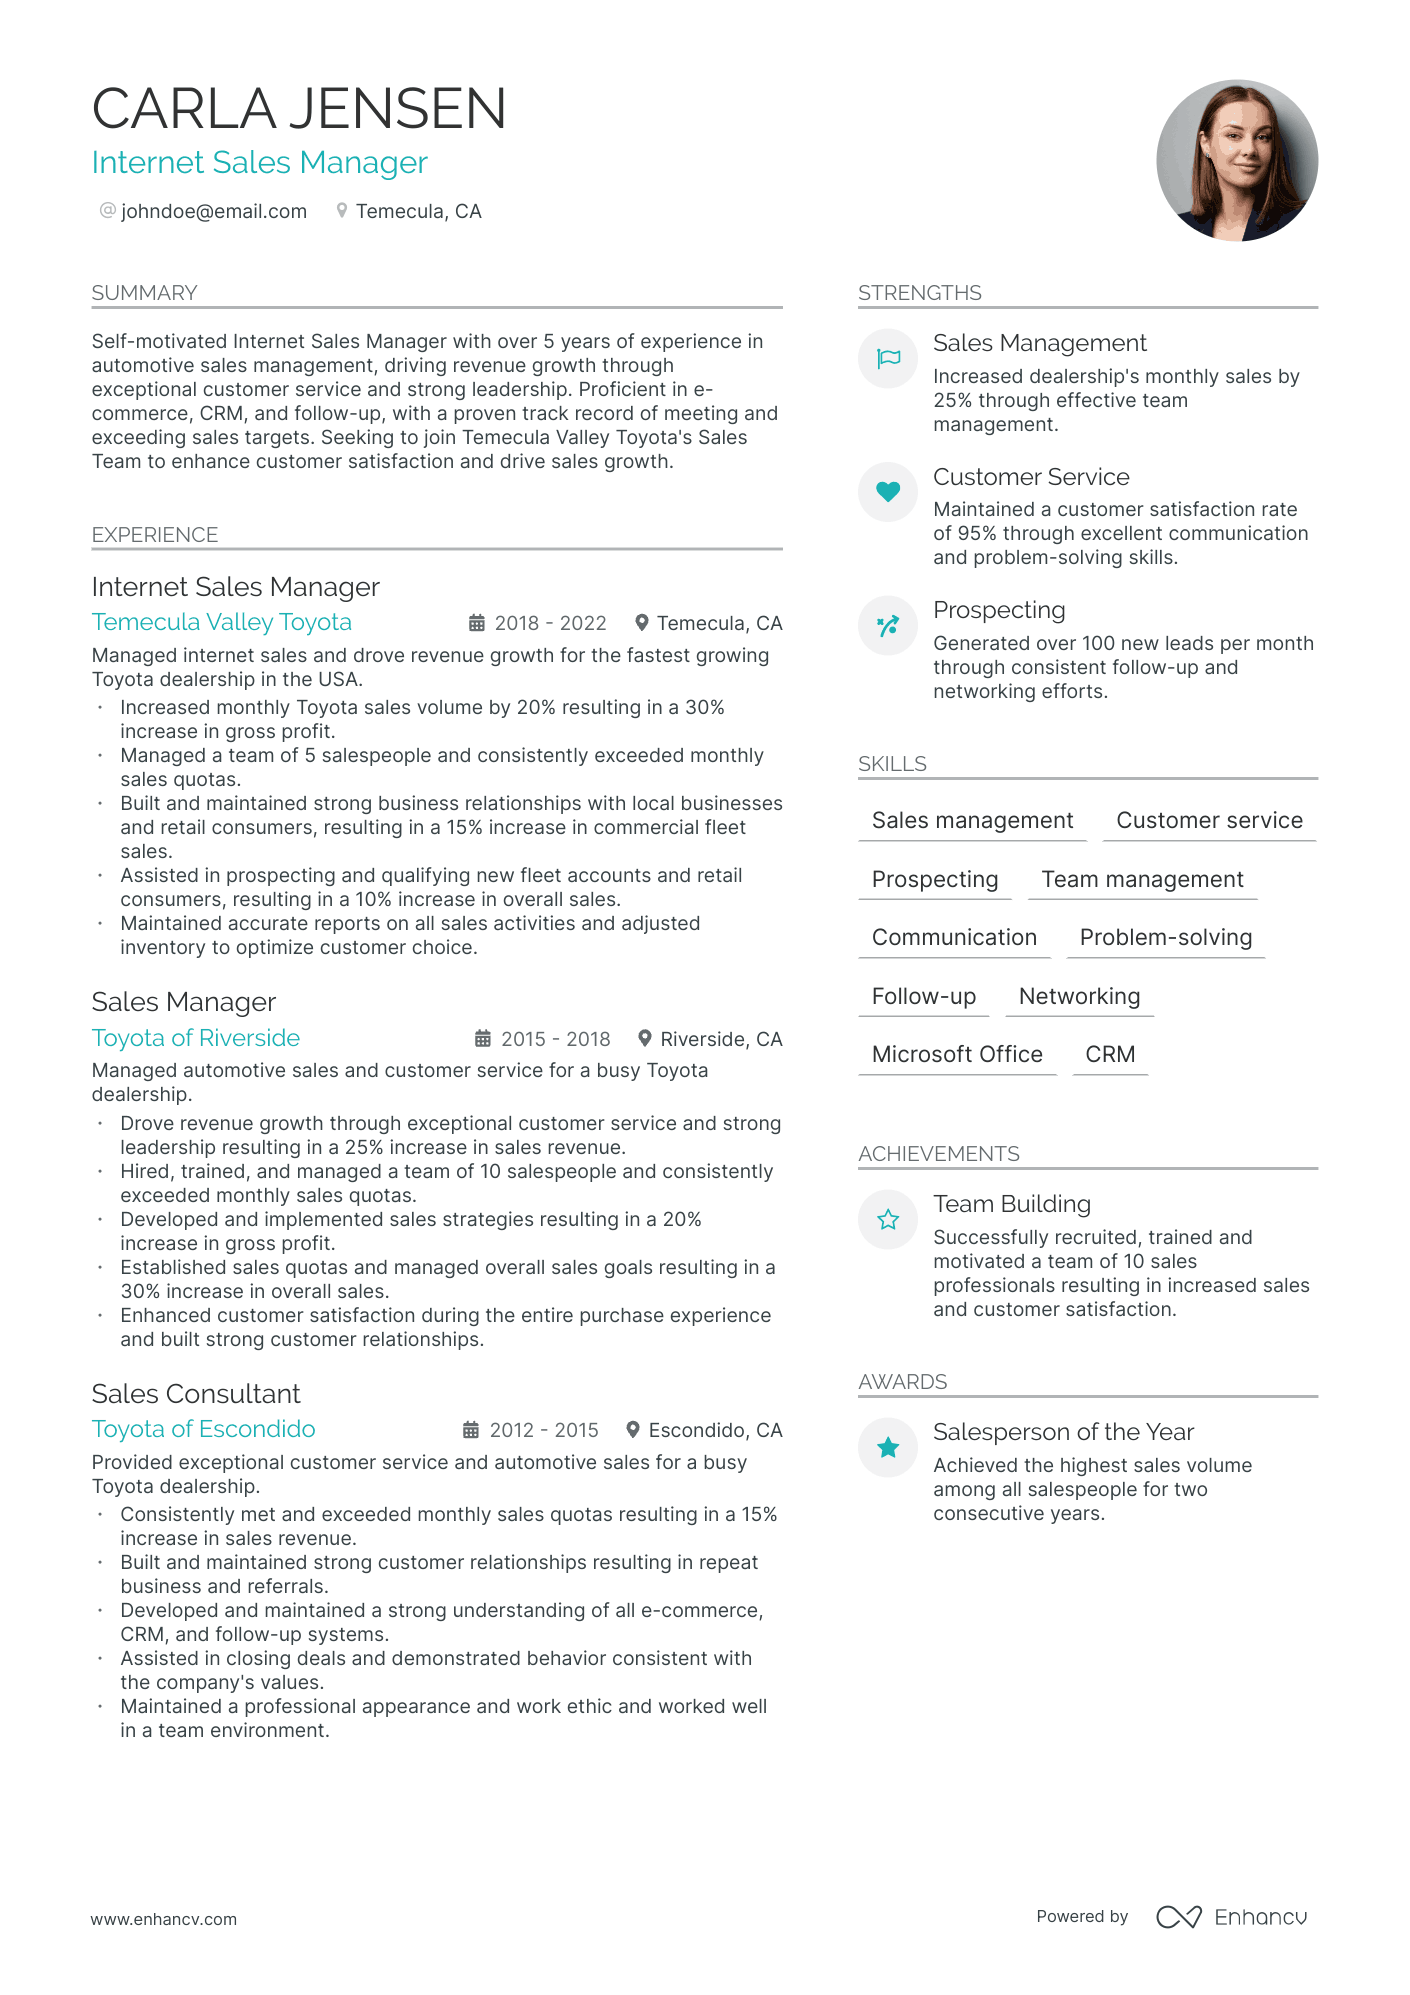 Internet Sales Manager resume example